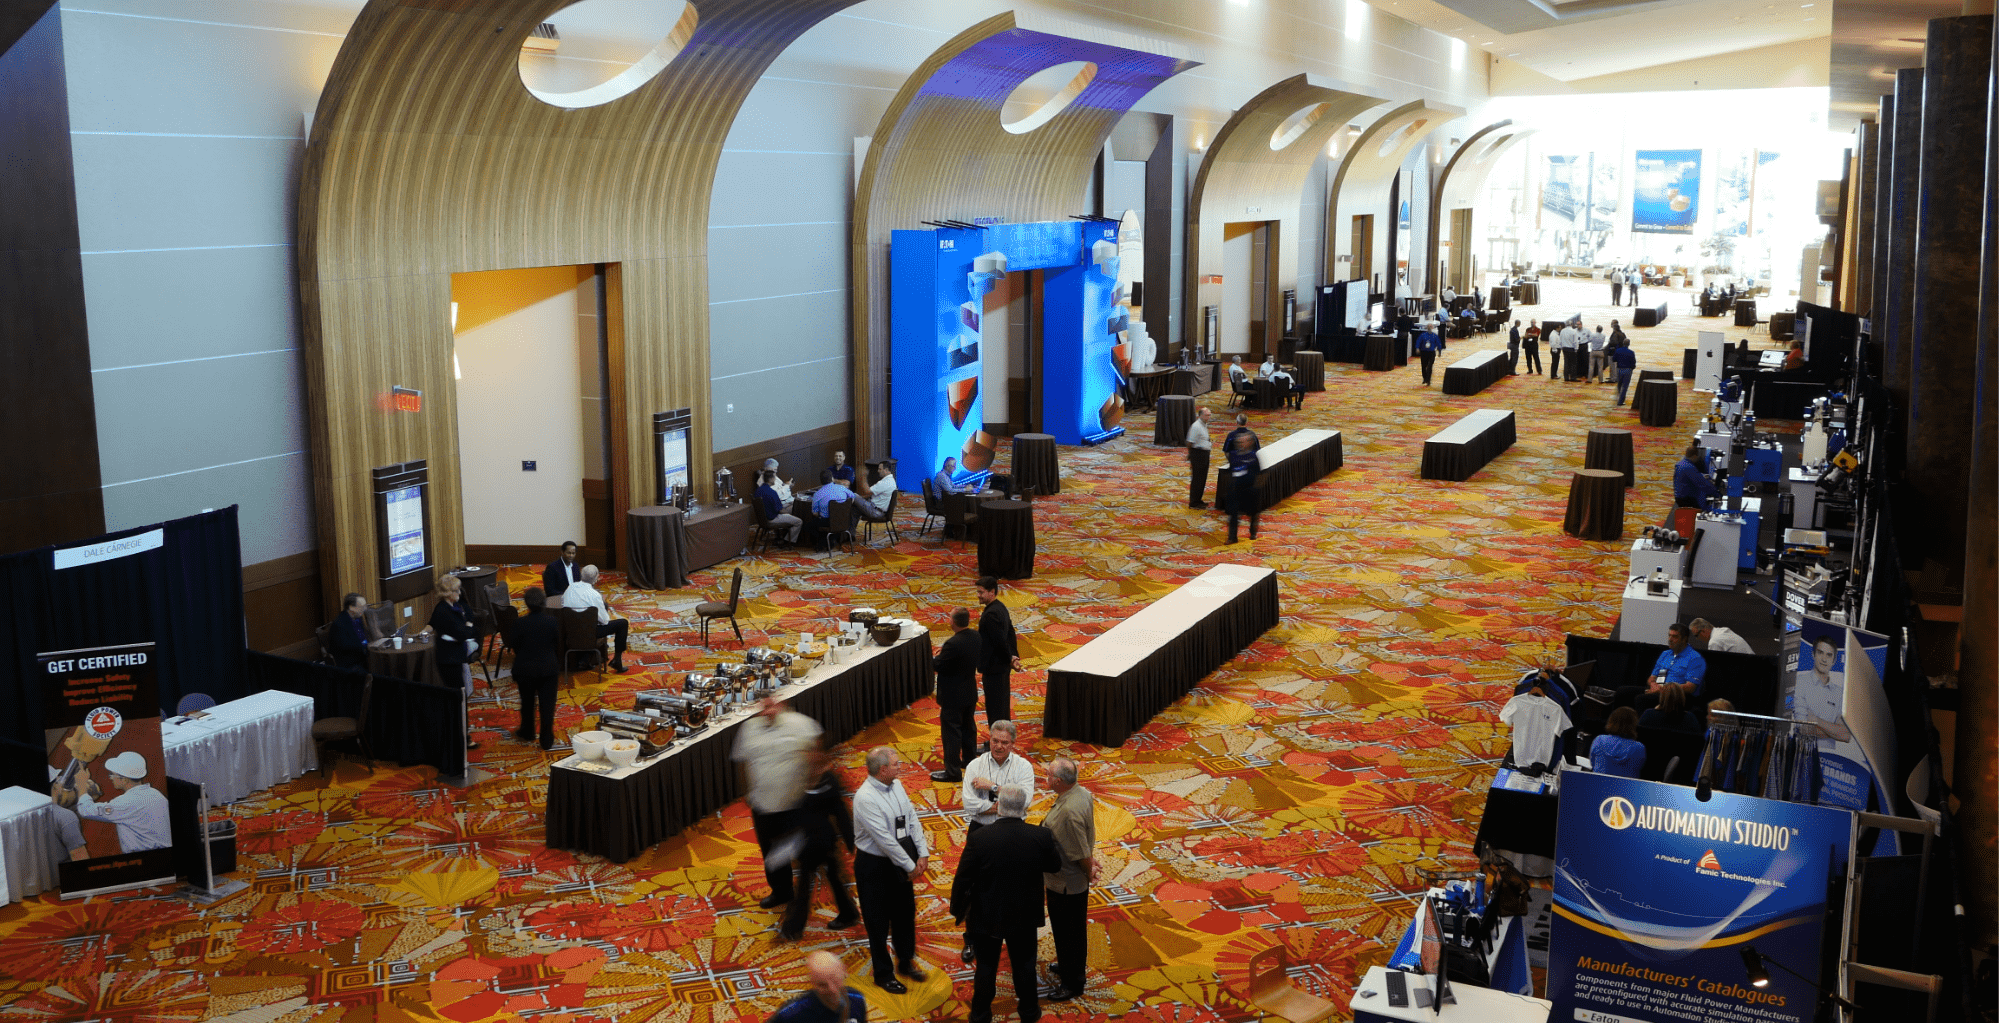 Attendees attending an Exhibit Hall for industry event